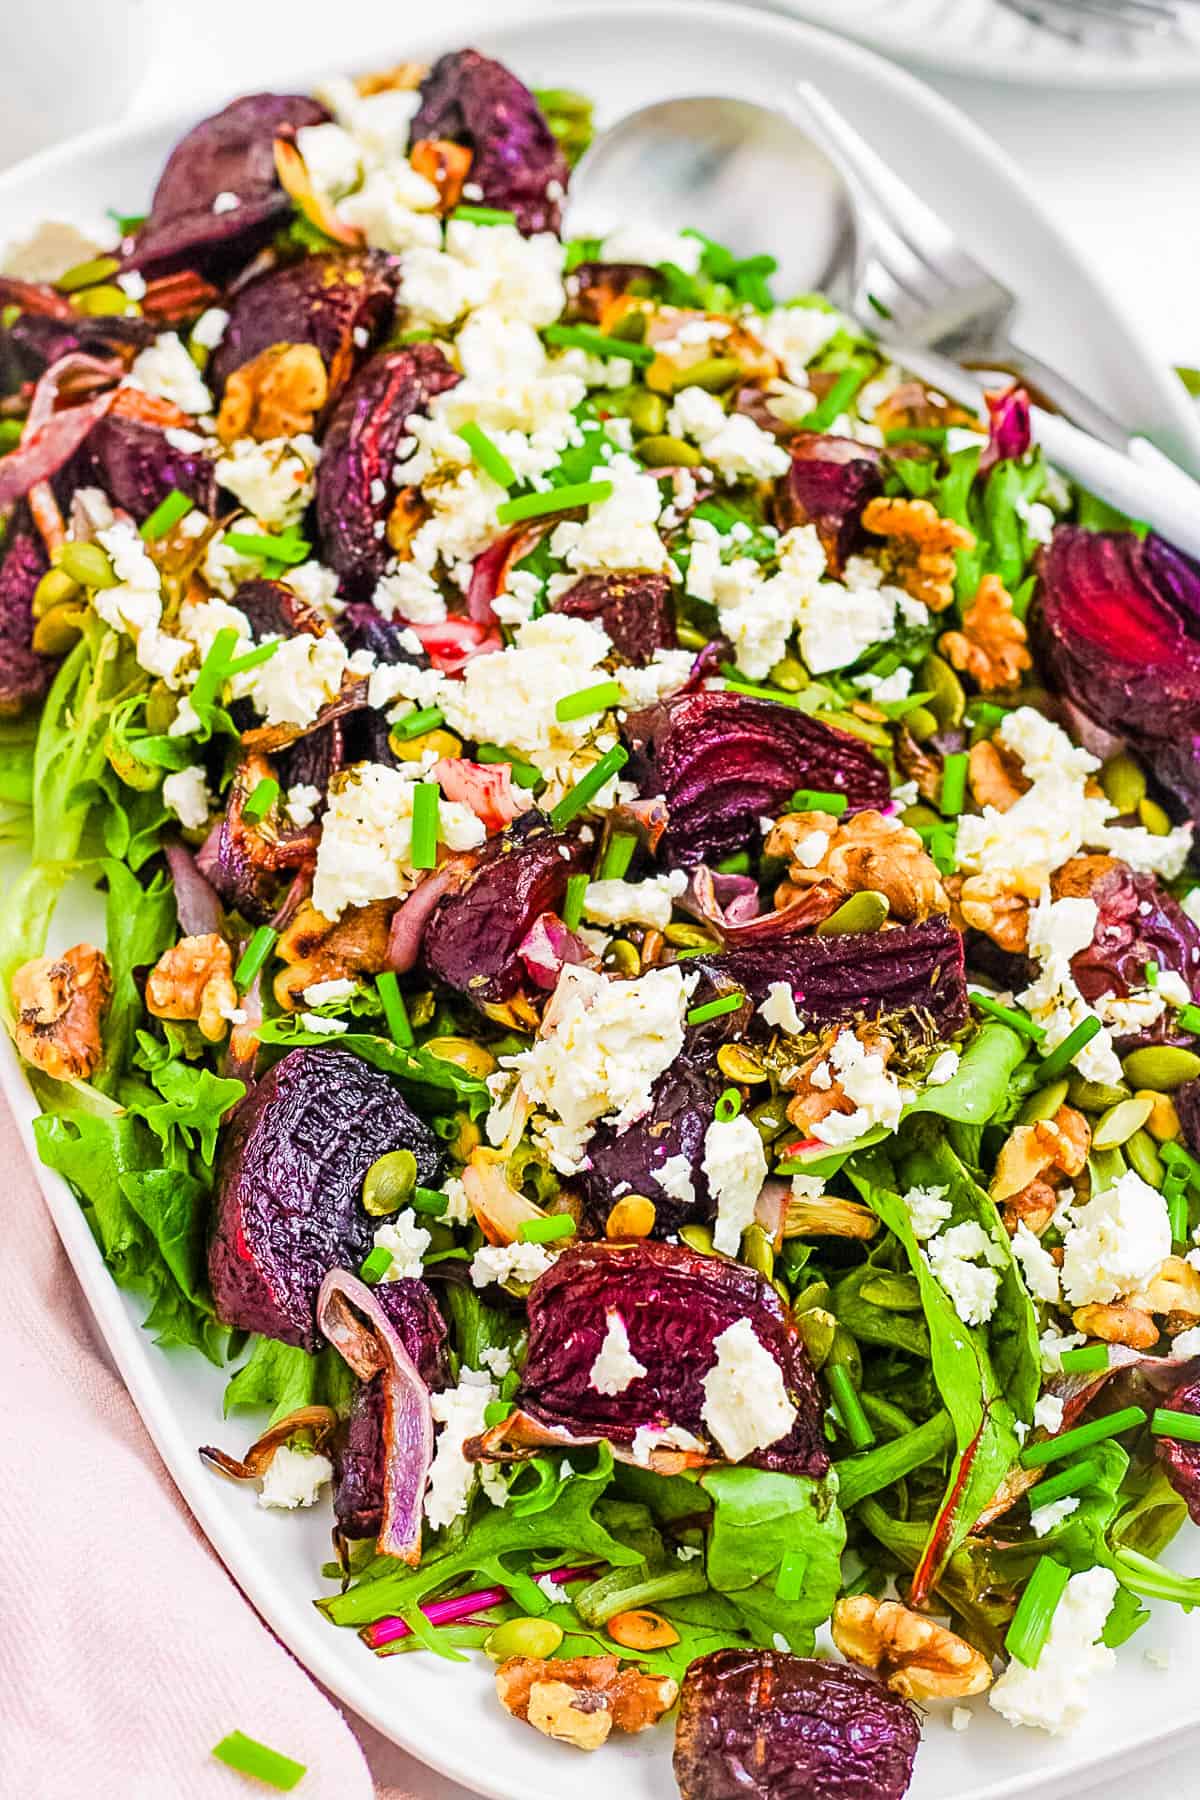 Roasted beet and feta salad with walnuts and mixed greens, served on a large white serving platter.